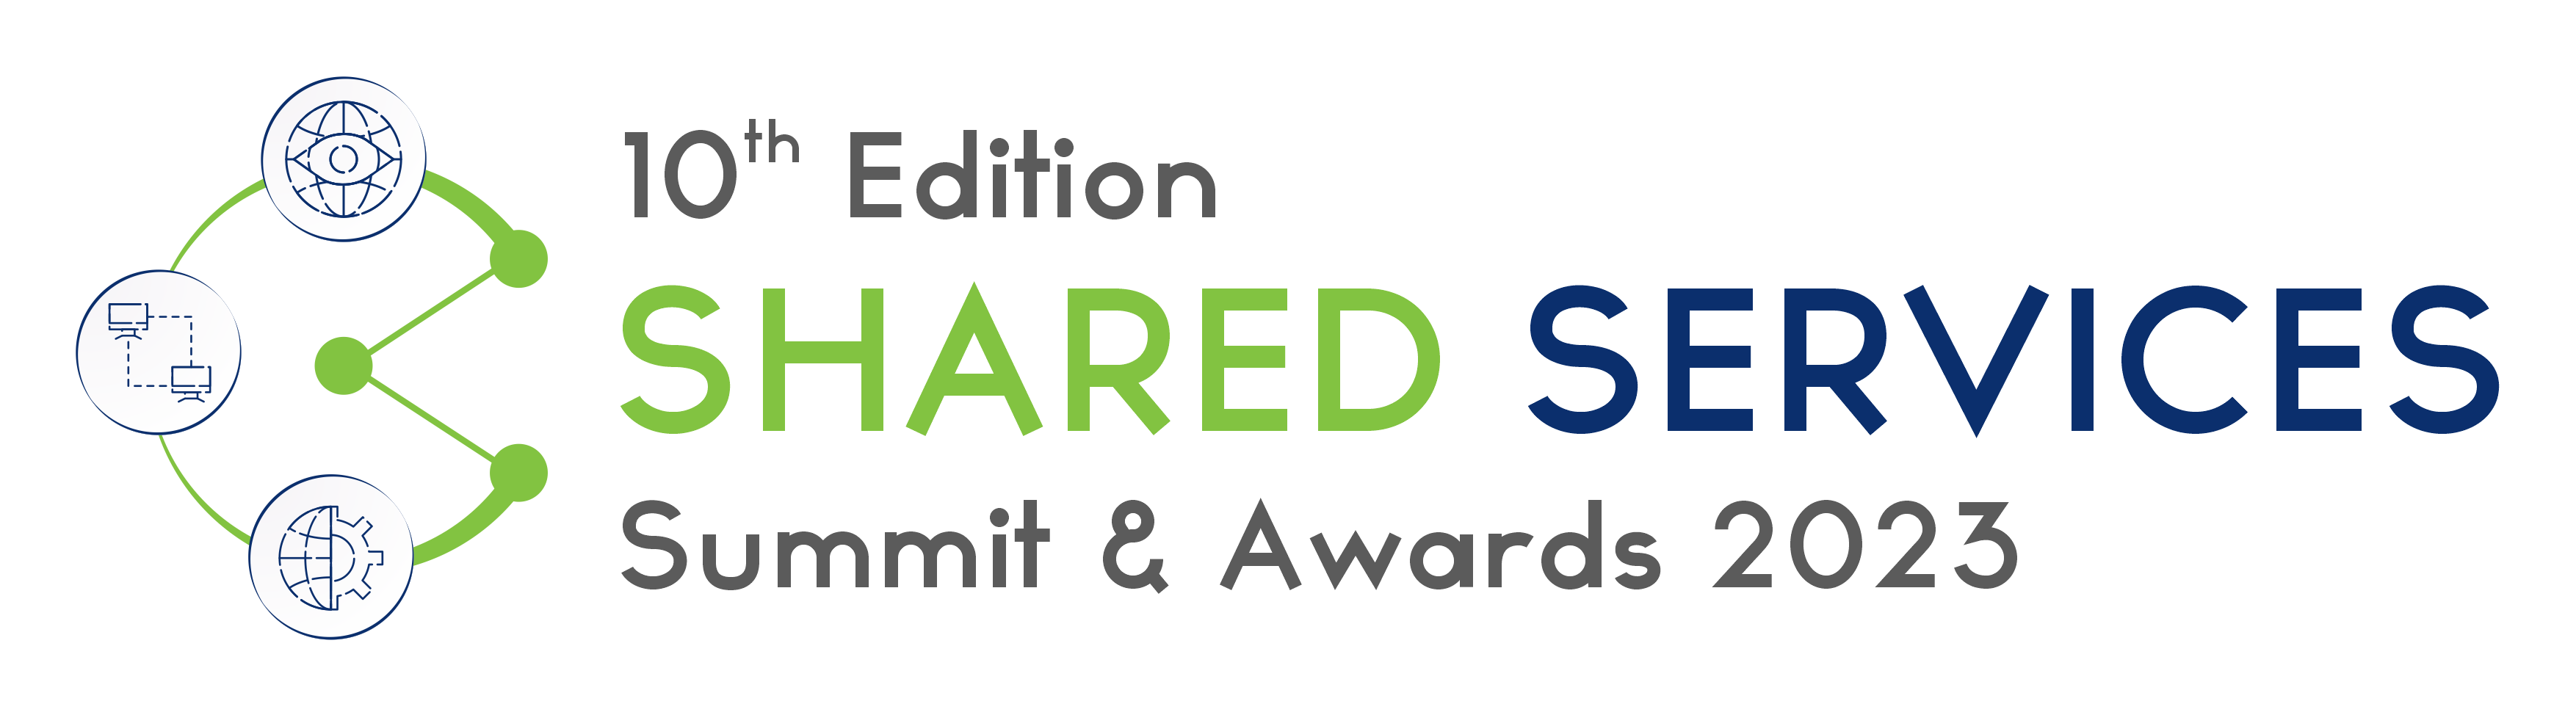 10th Edition Shared Service Summit and Awards 2023